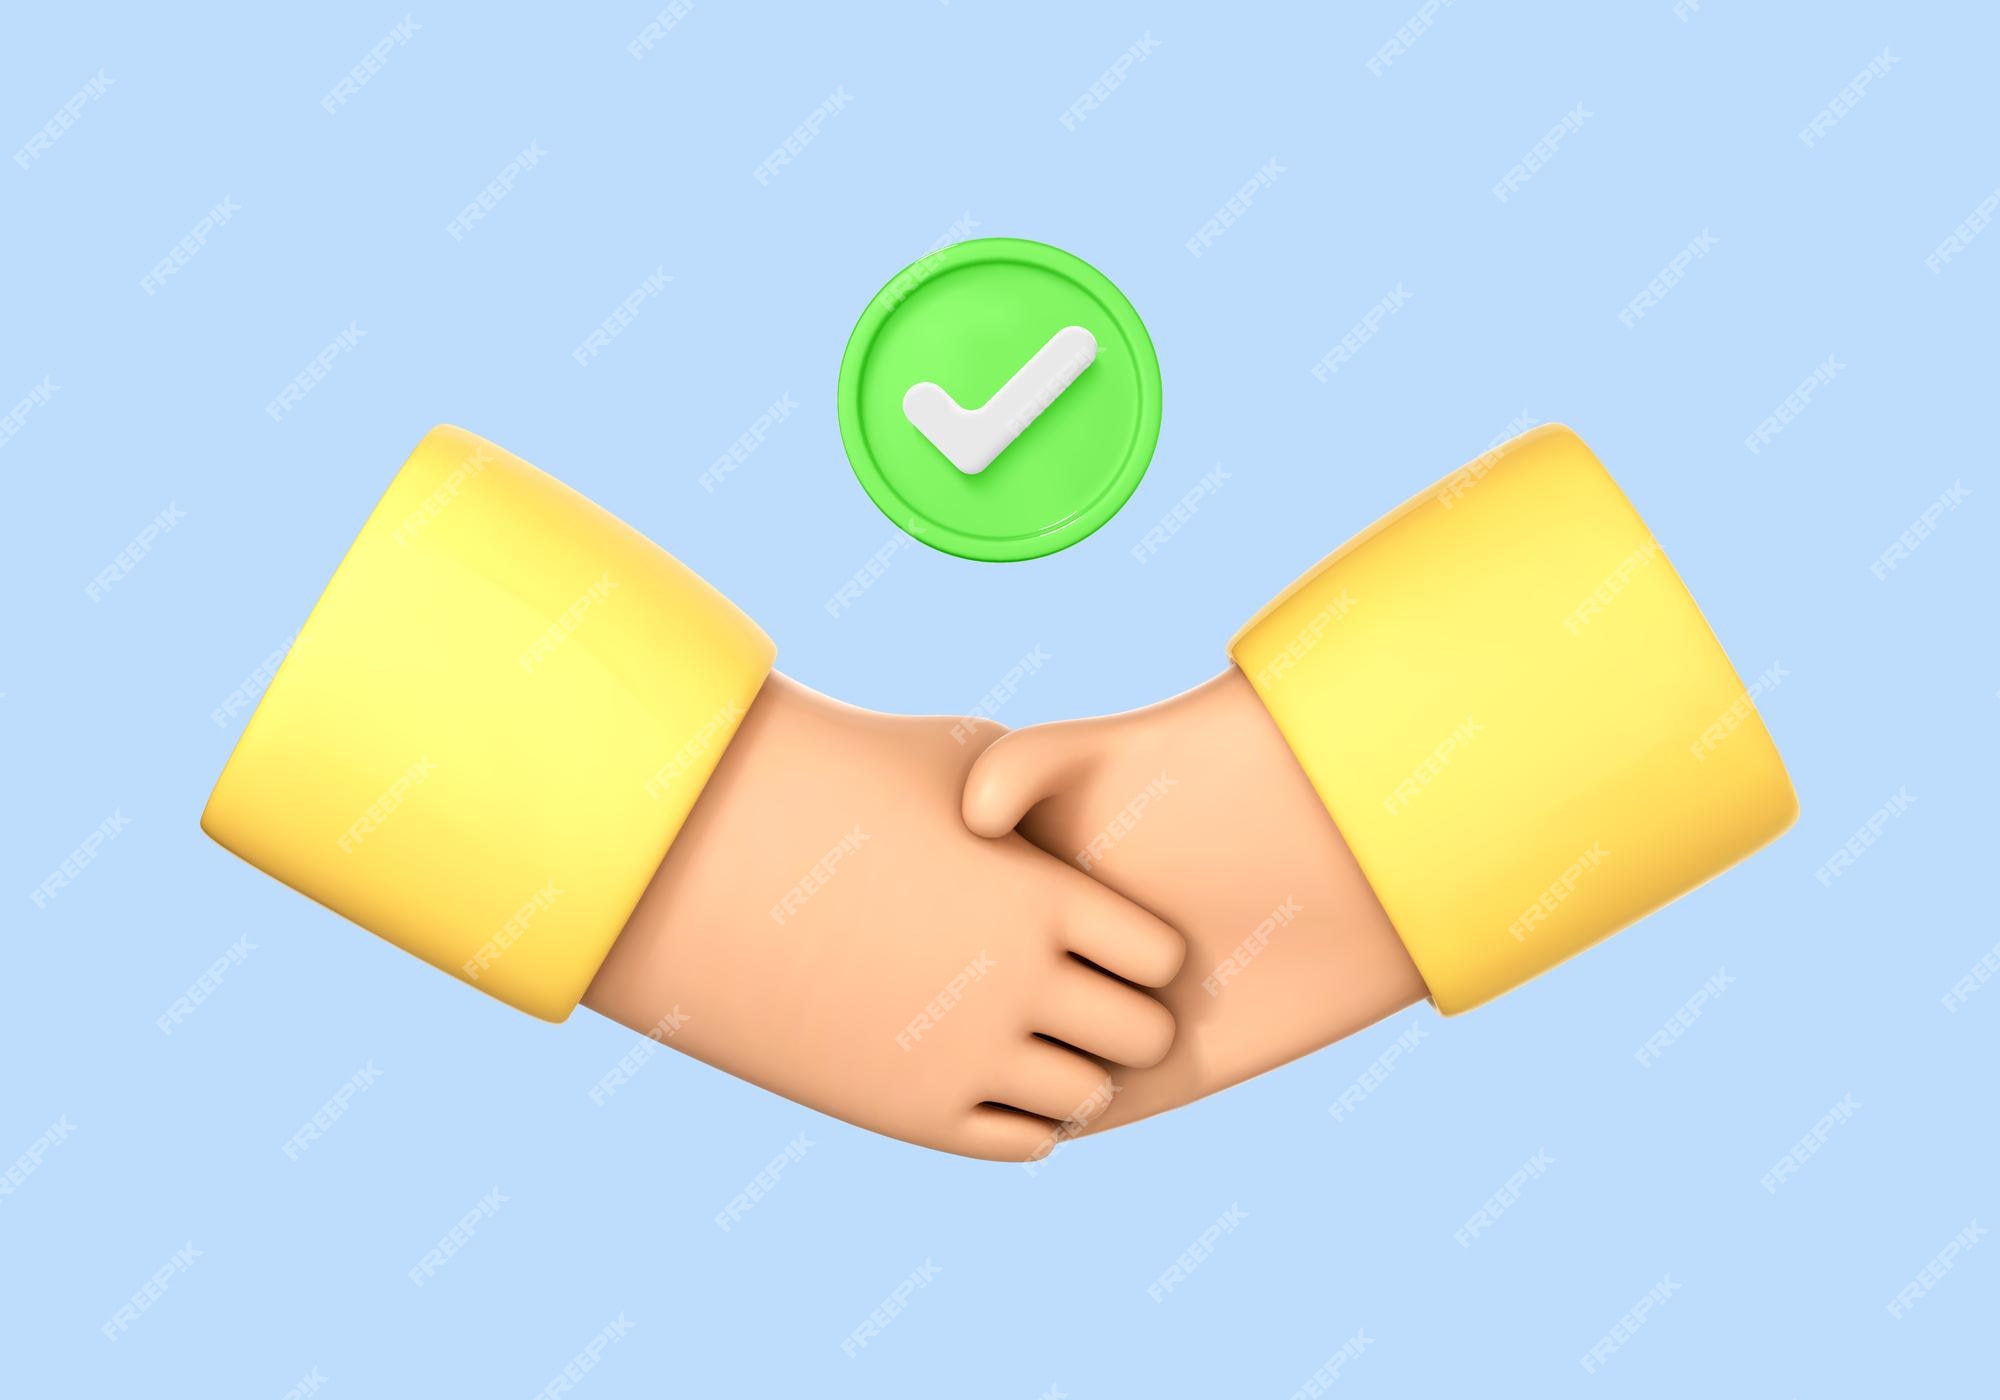 Handshake - Free hands and gestures icons